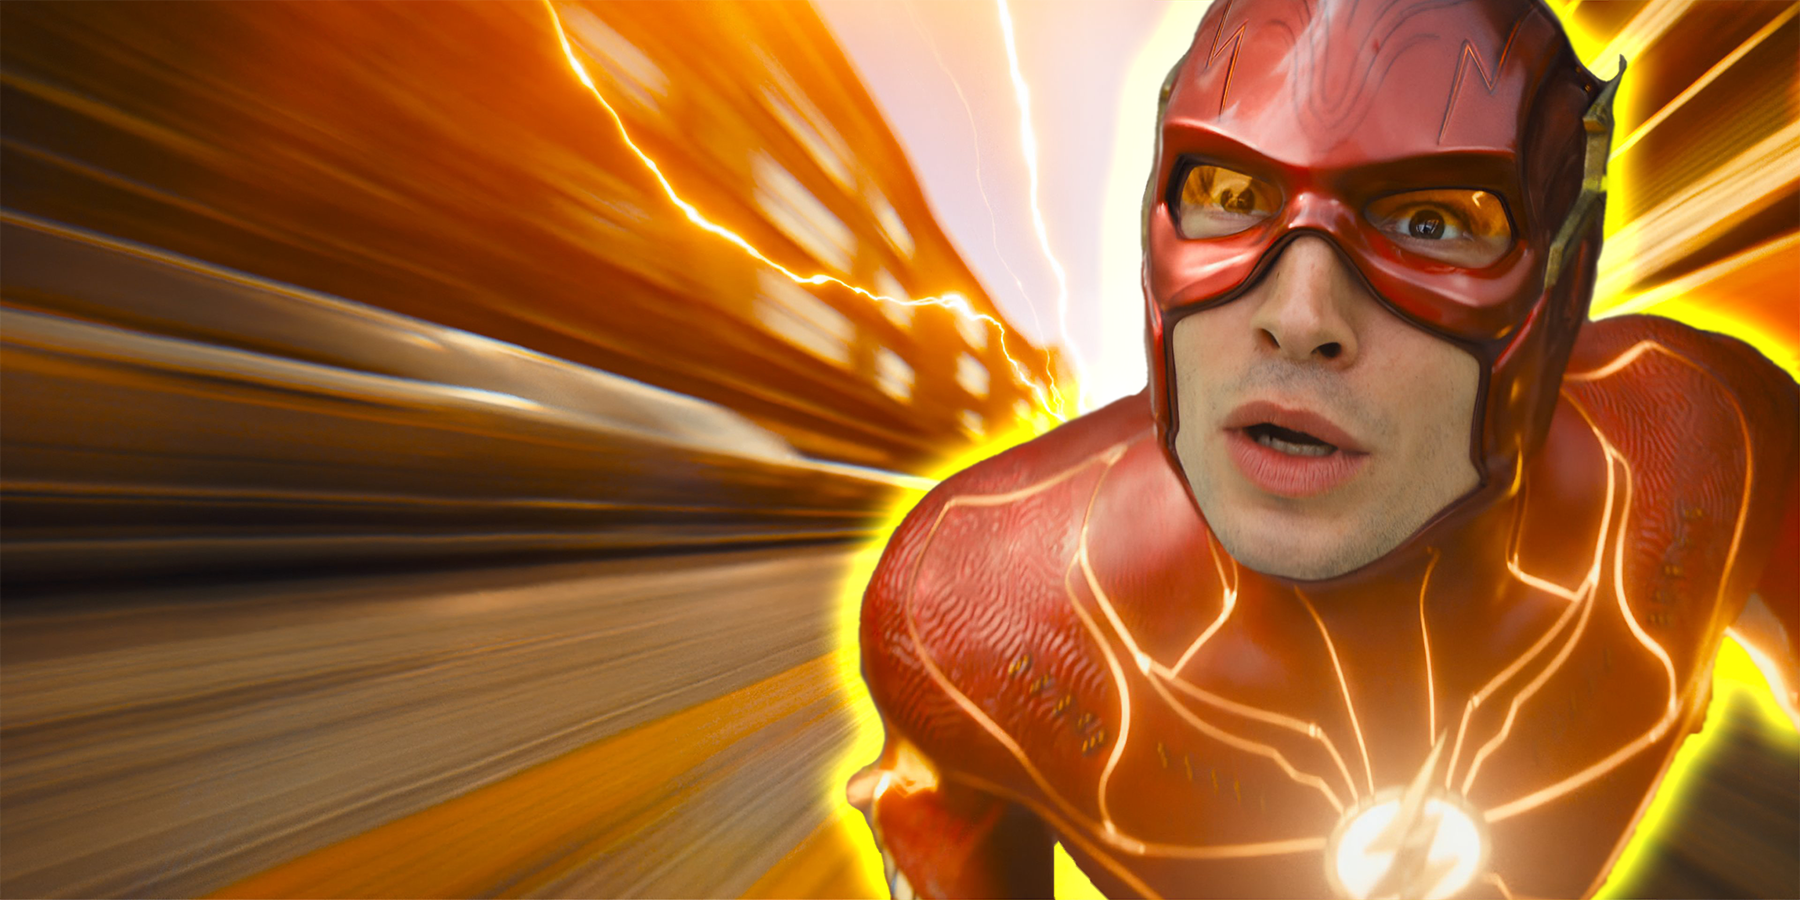 The Flash in the Speed Force in the 2023 movie